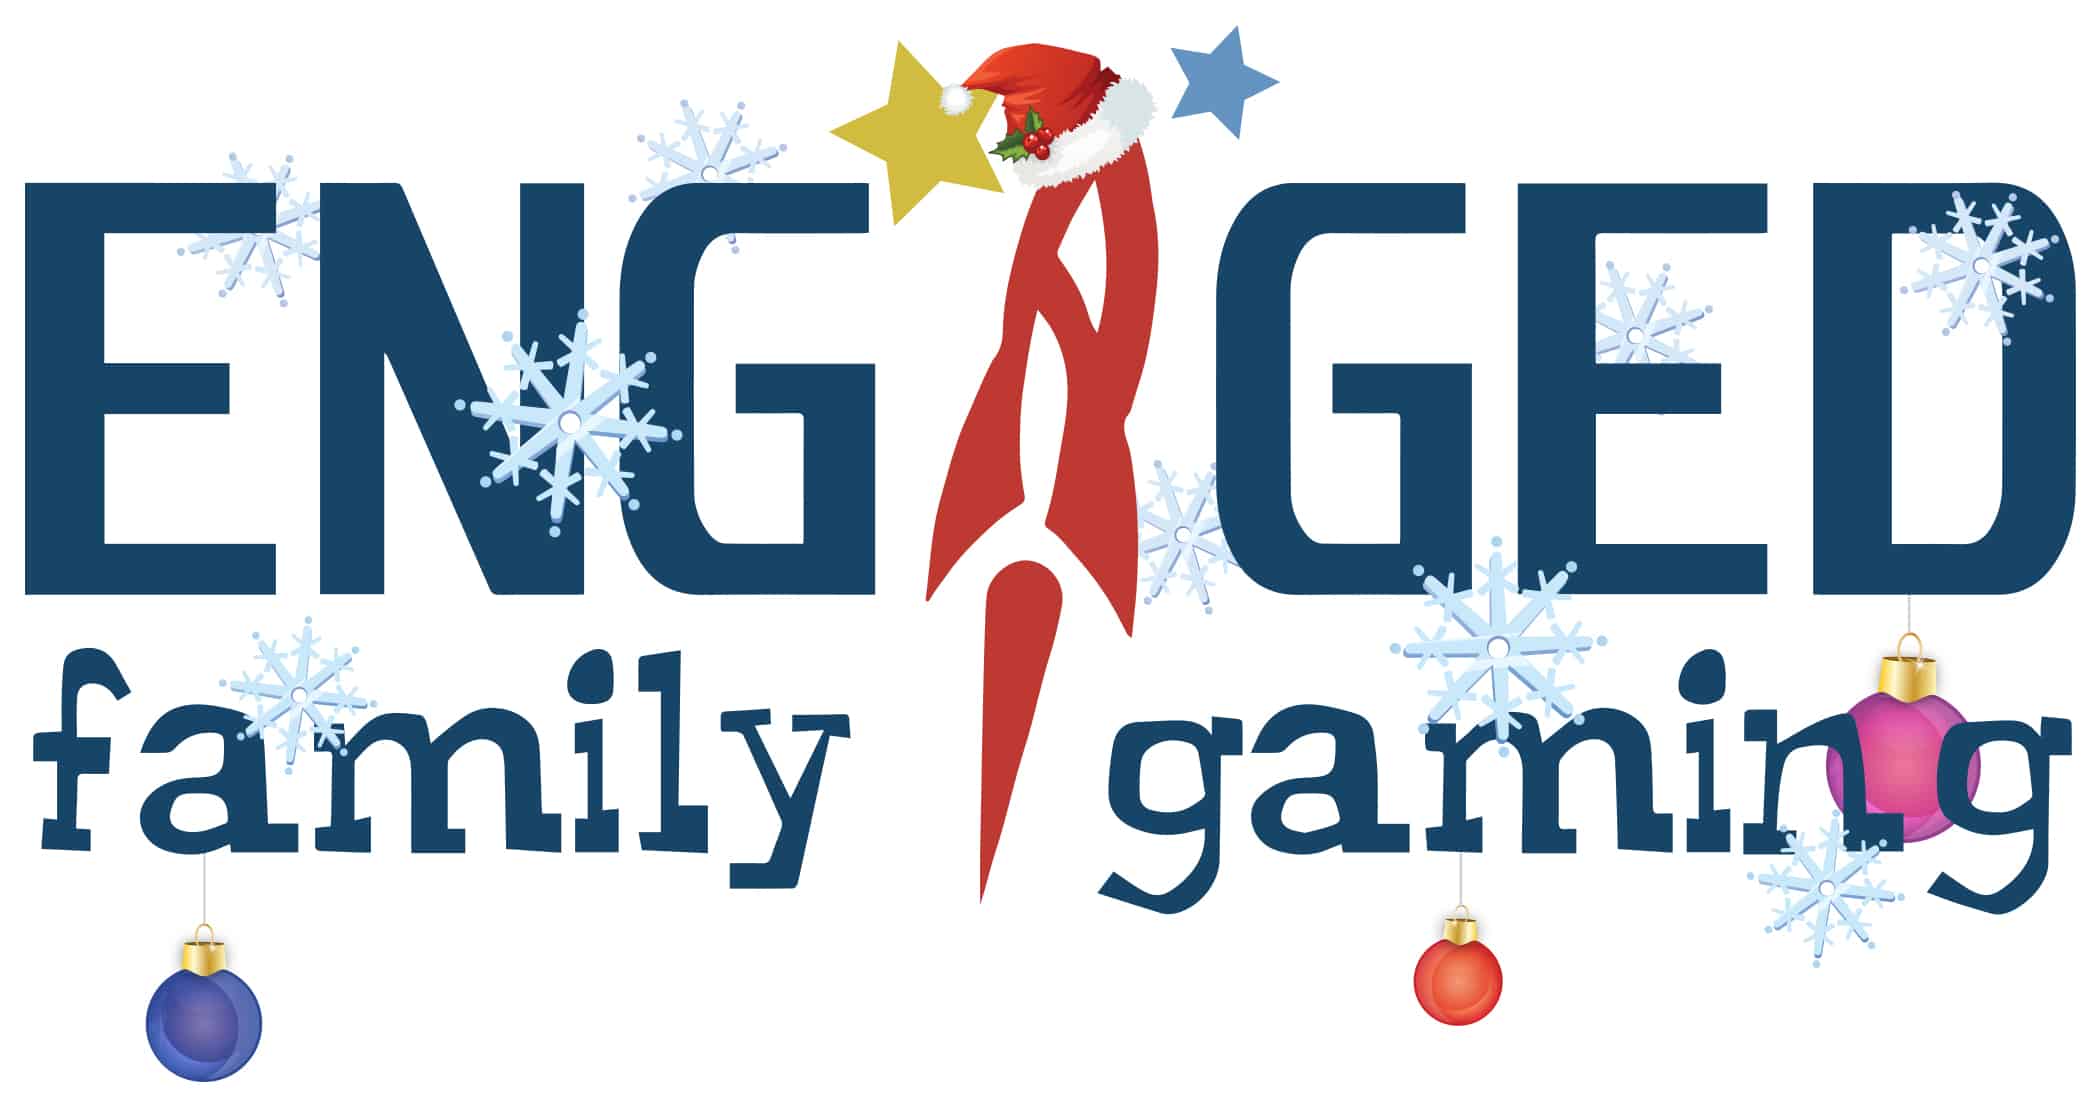 Spend the Holiday Season Gaming with Family and Friends with New